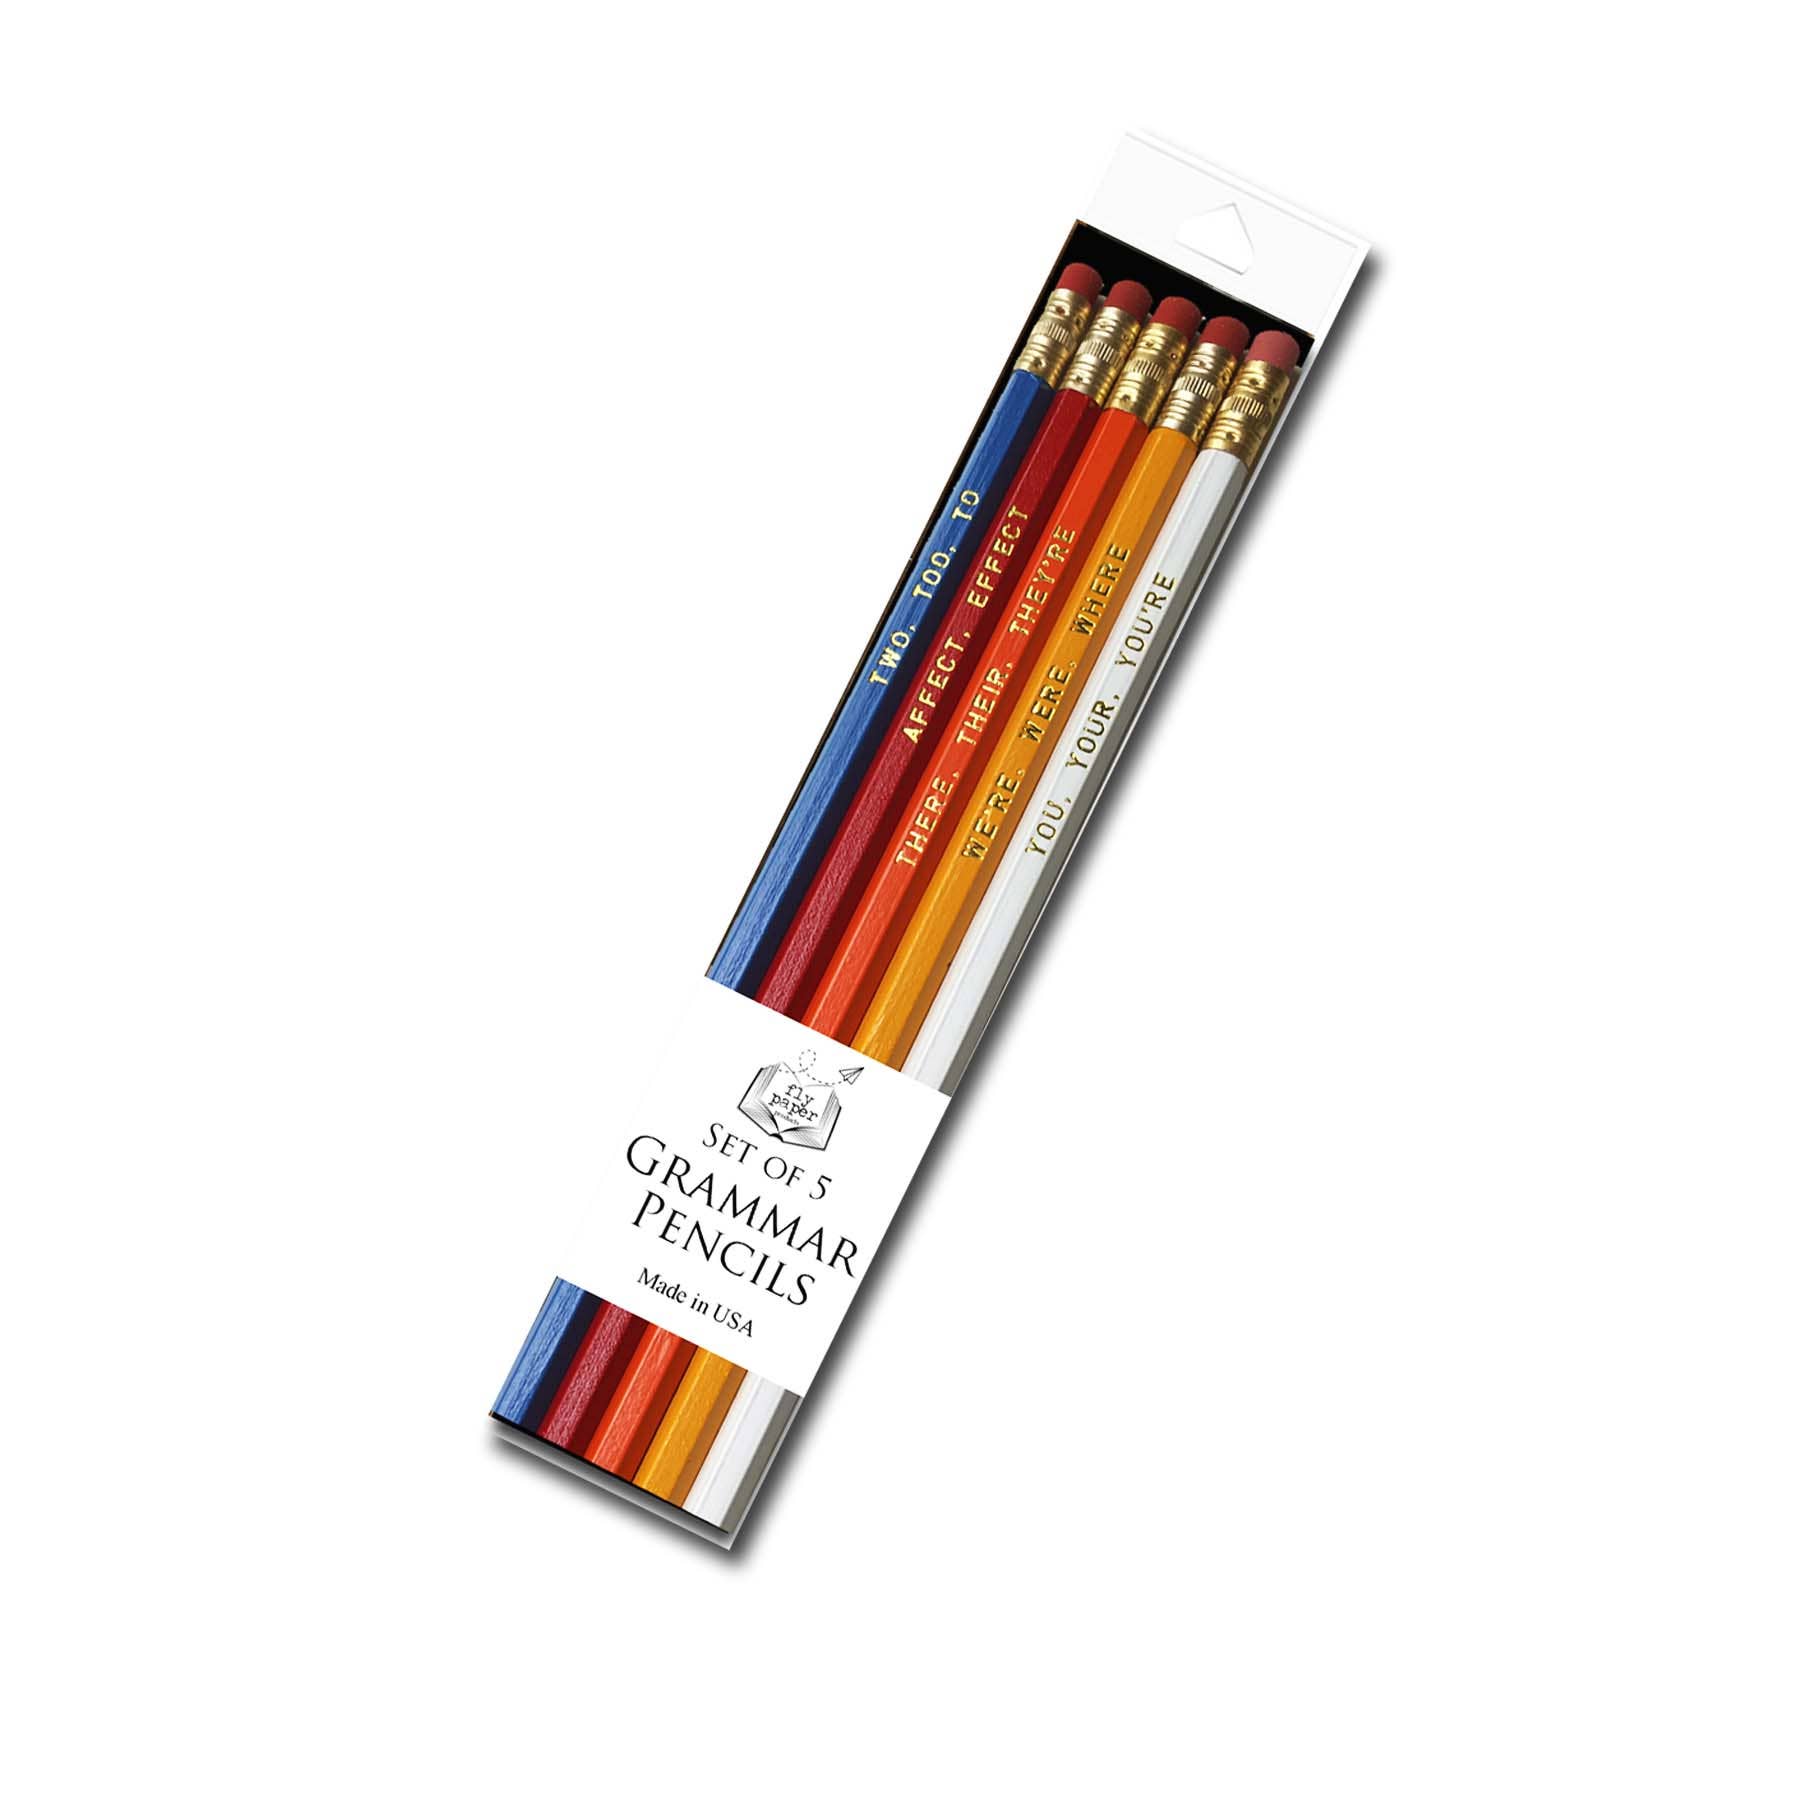 Pencils come packaged as a set